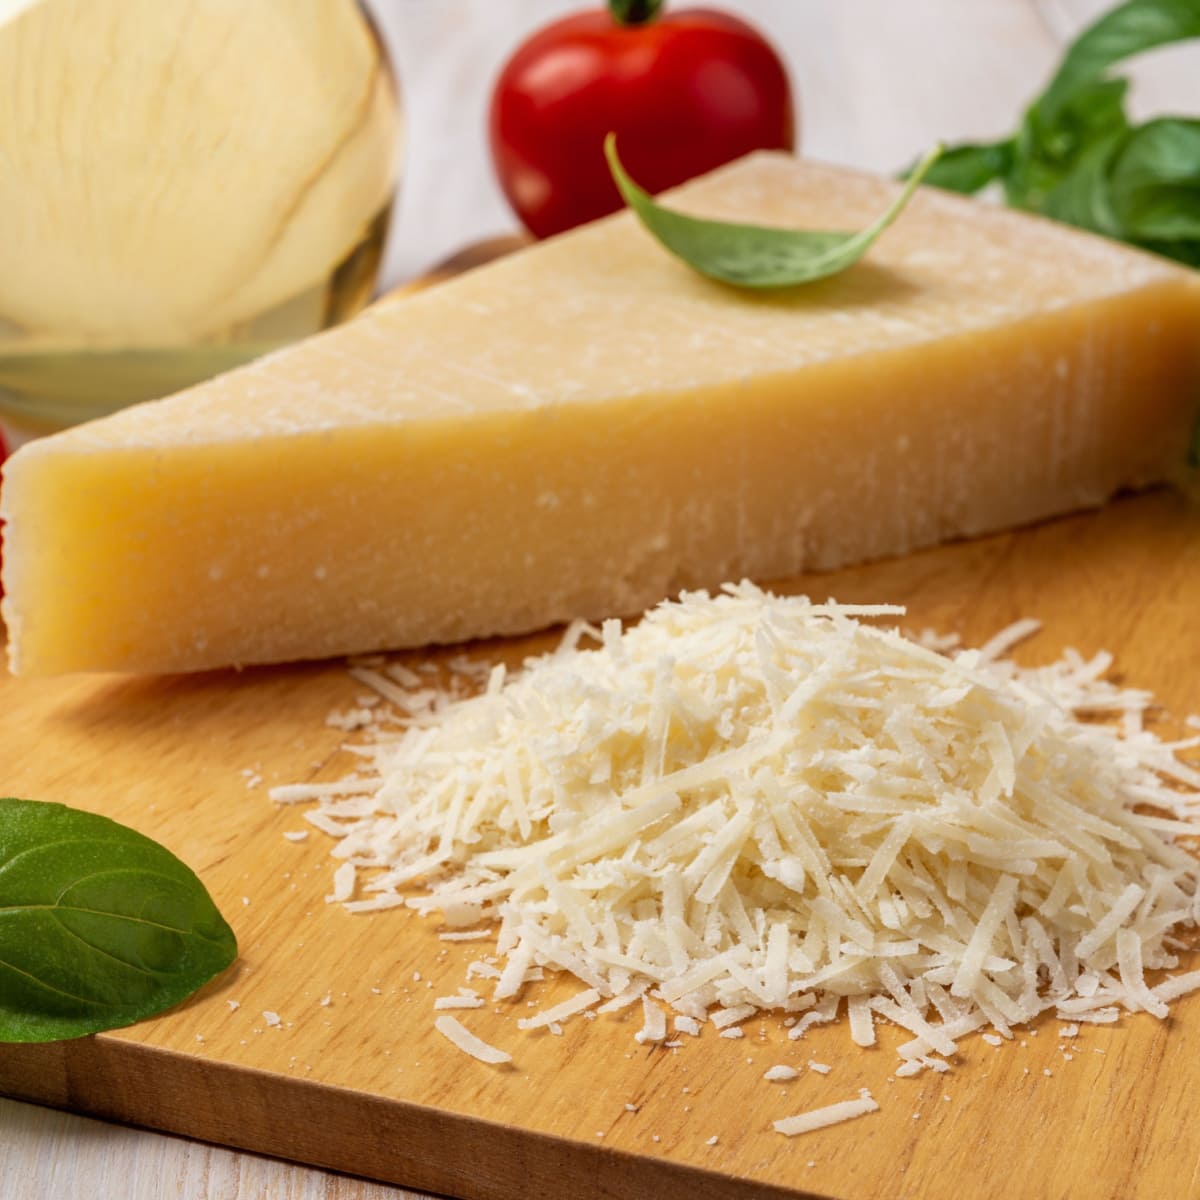 Grated Grana Padano and Wedge Cheese with Tomatoes on a Wooden Cutting Board
